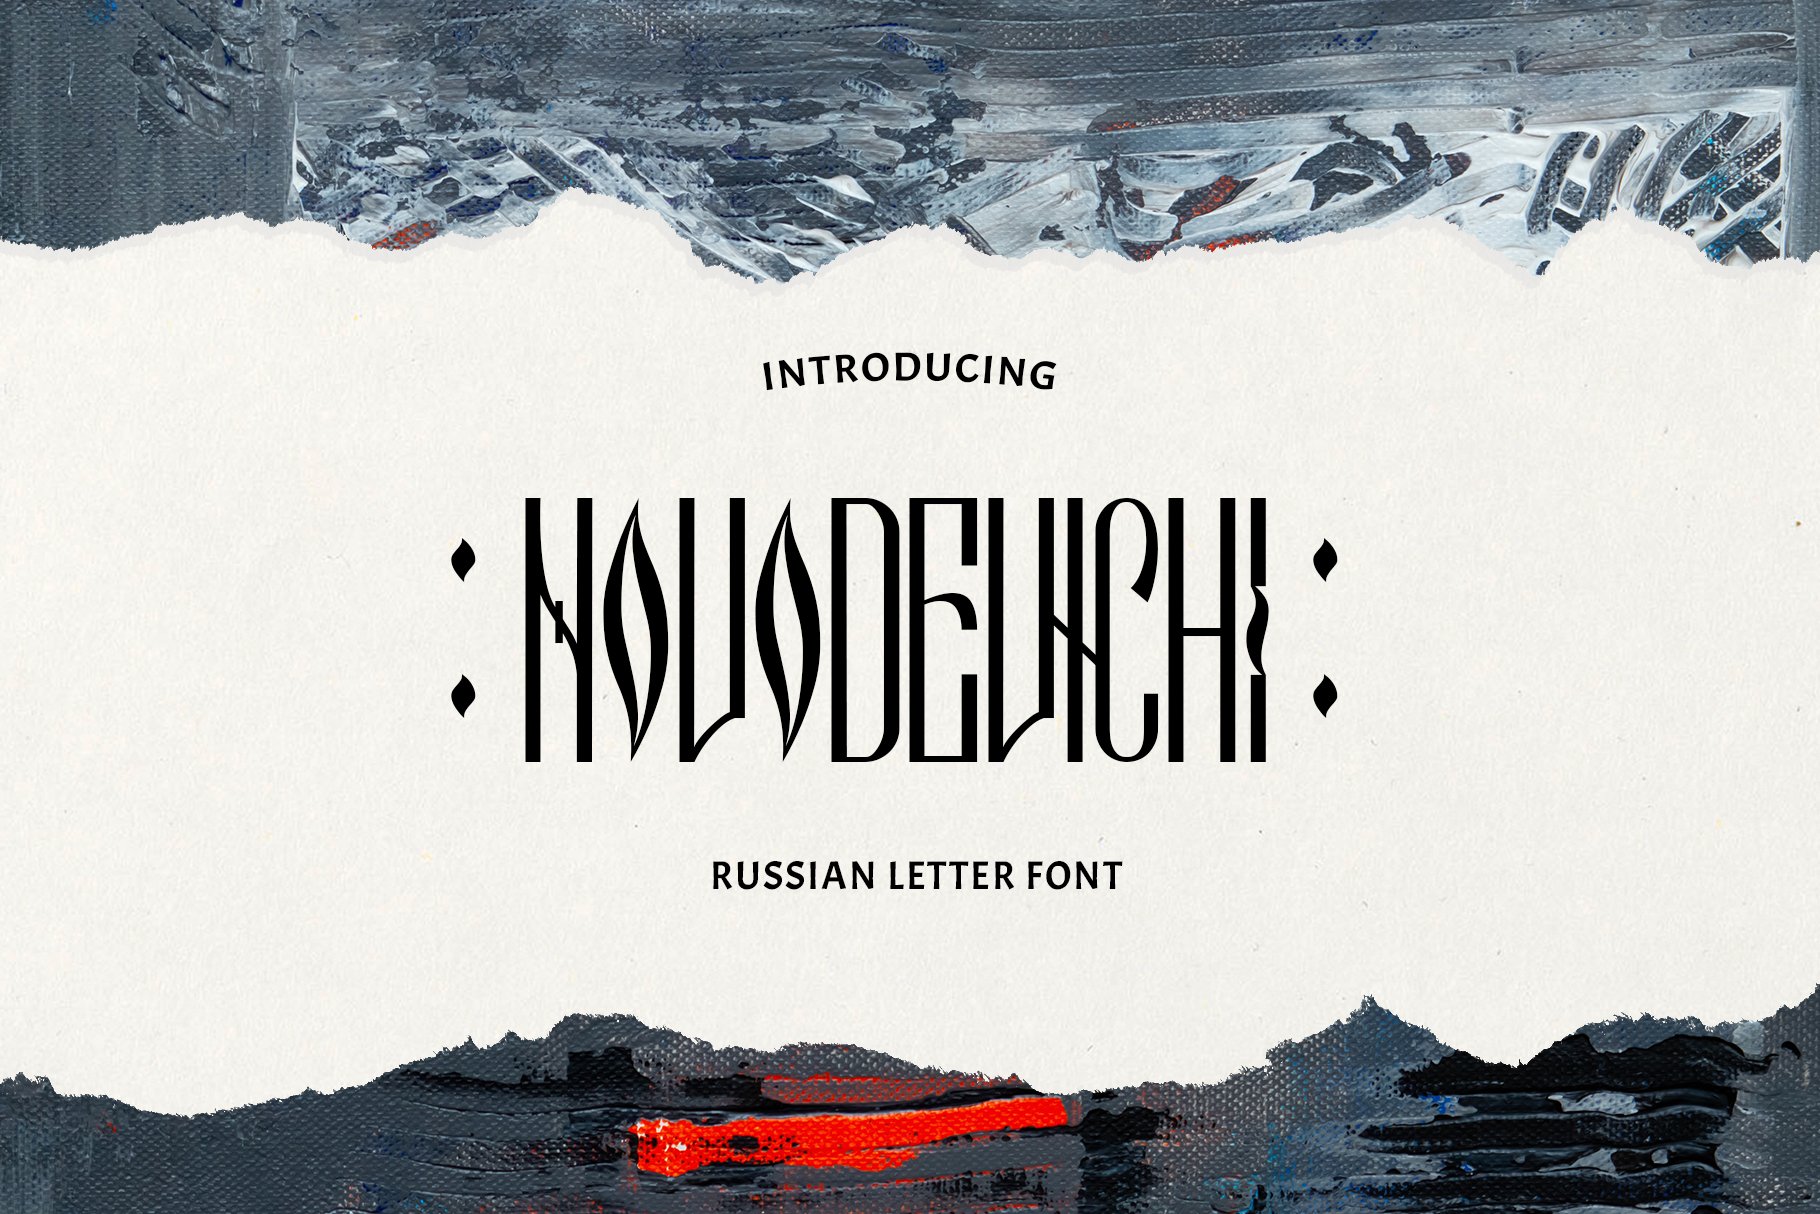 Novodevichi - Russian Letter font cover image.